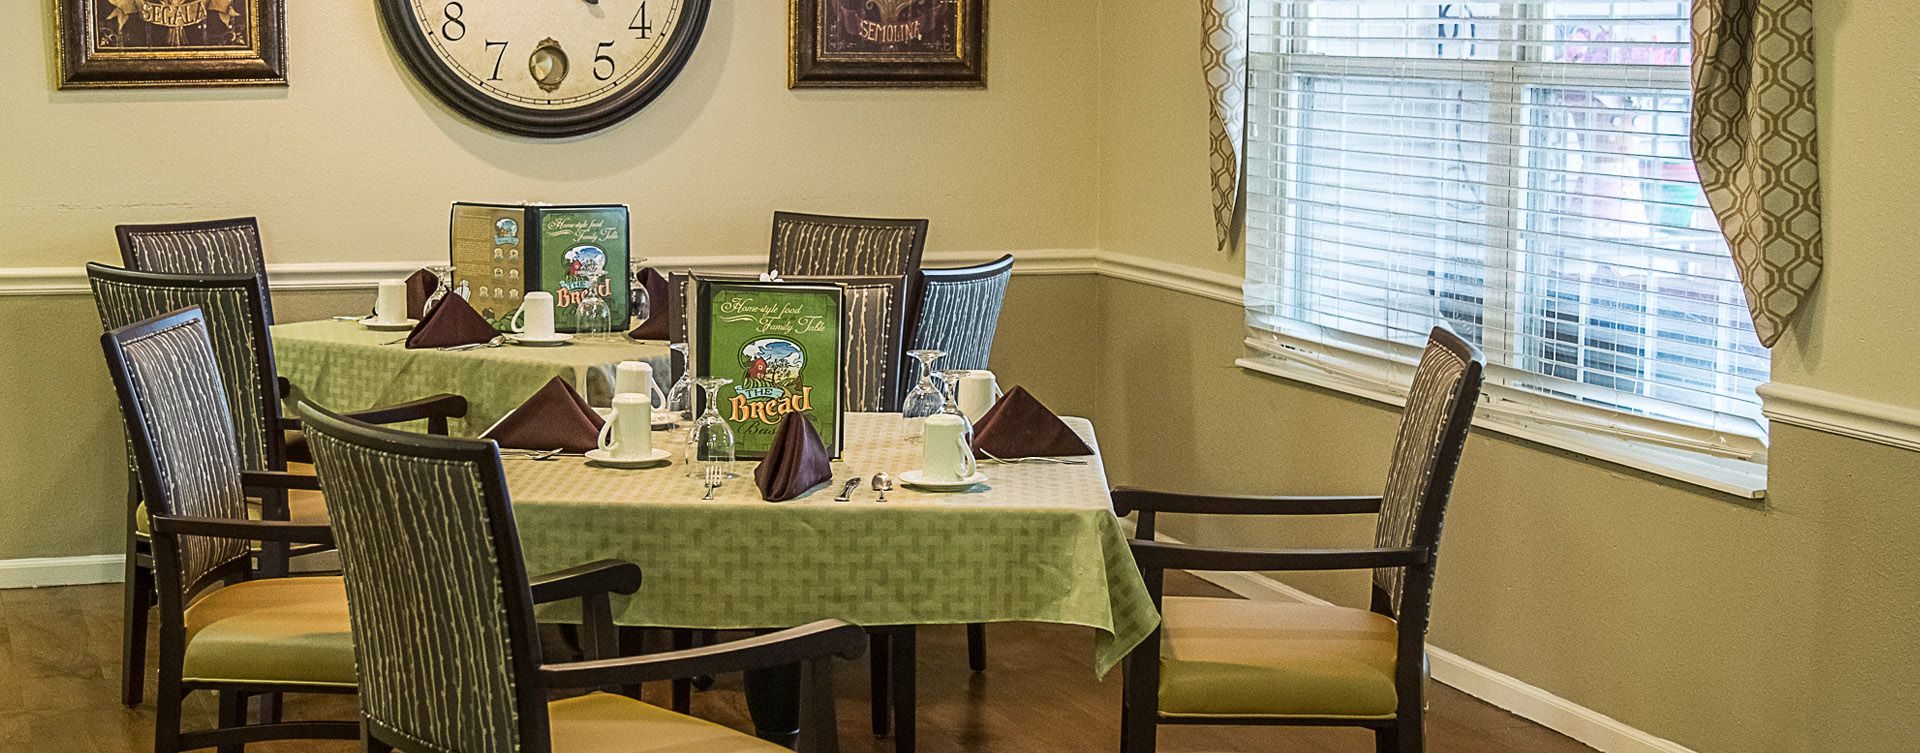 Residents with dementia receive additional assistance with meals in our Mary B’s dining room at Bickford of Davenport